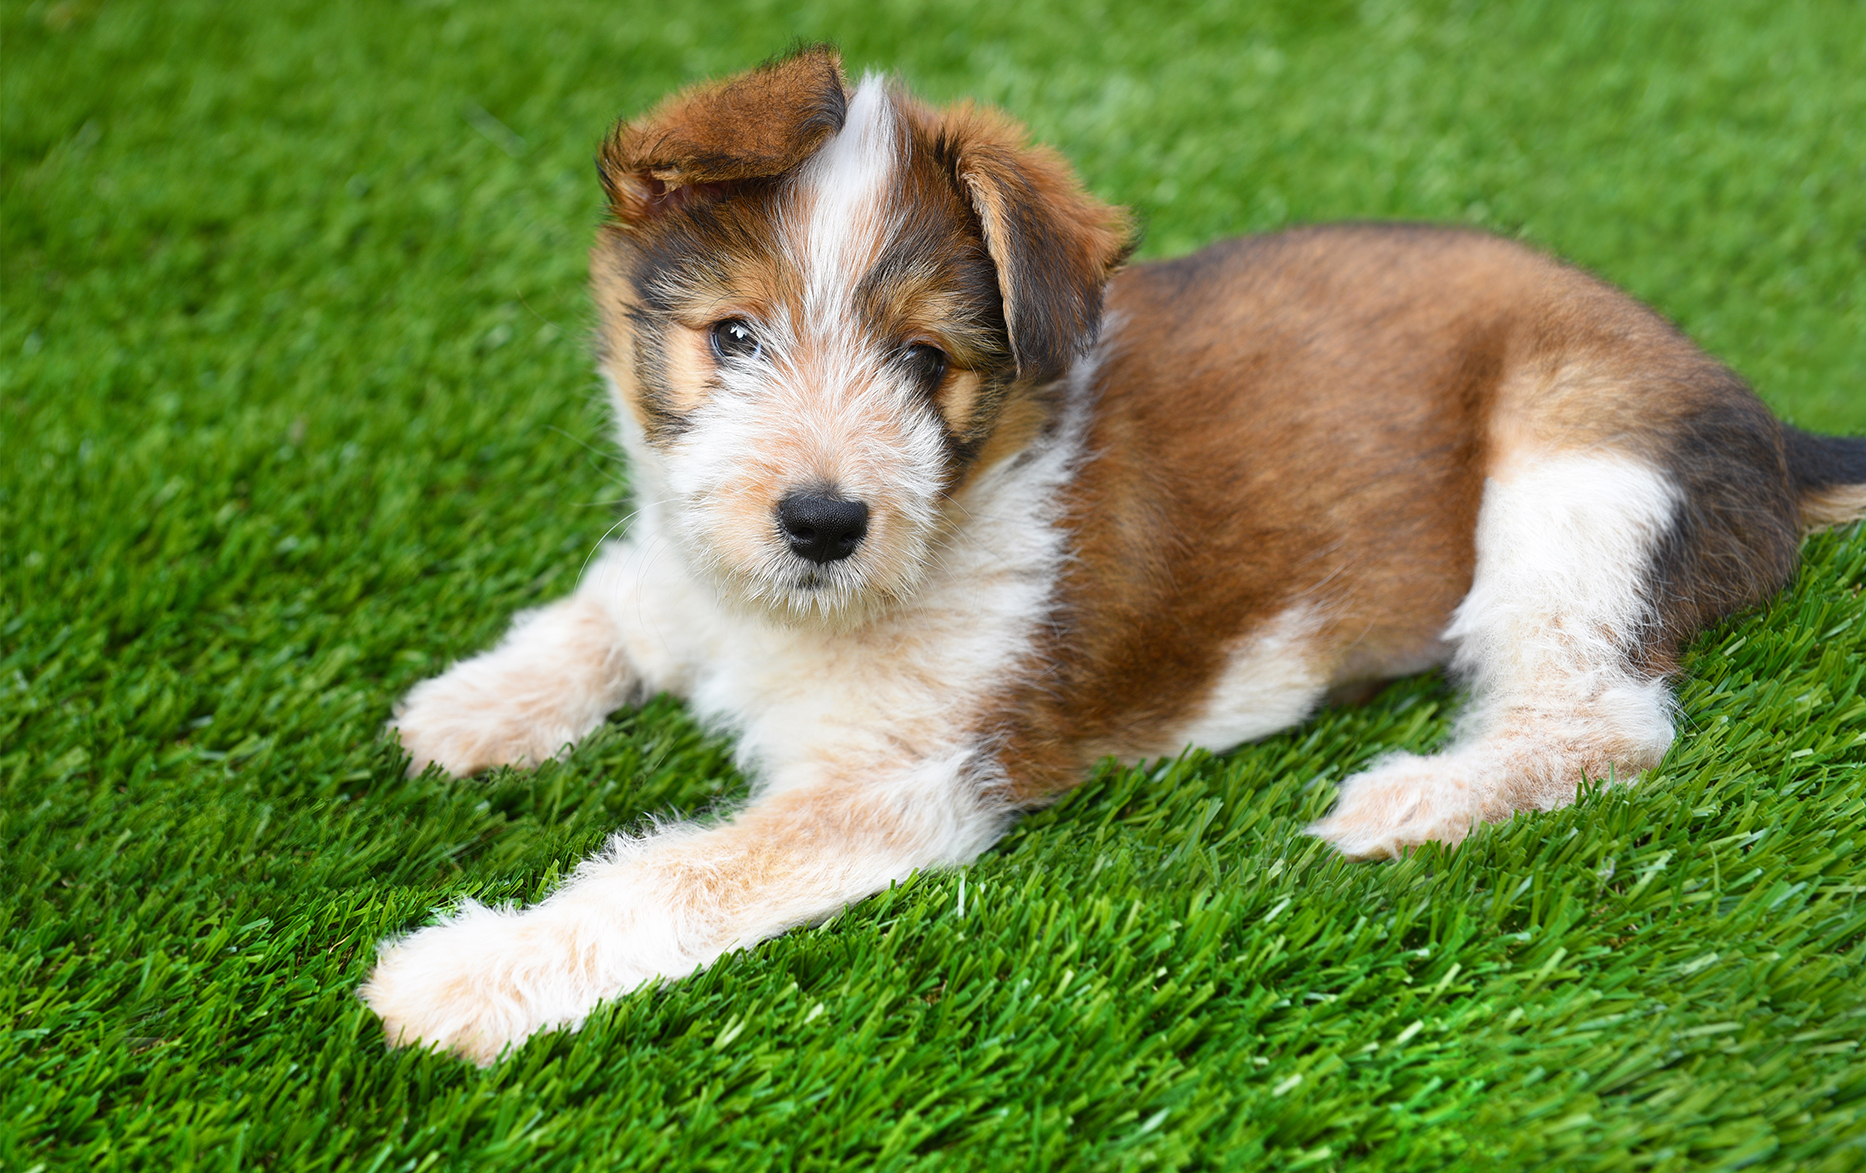 How To Clean Artificial Dog Grass